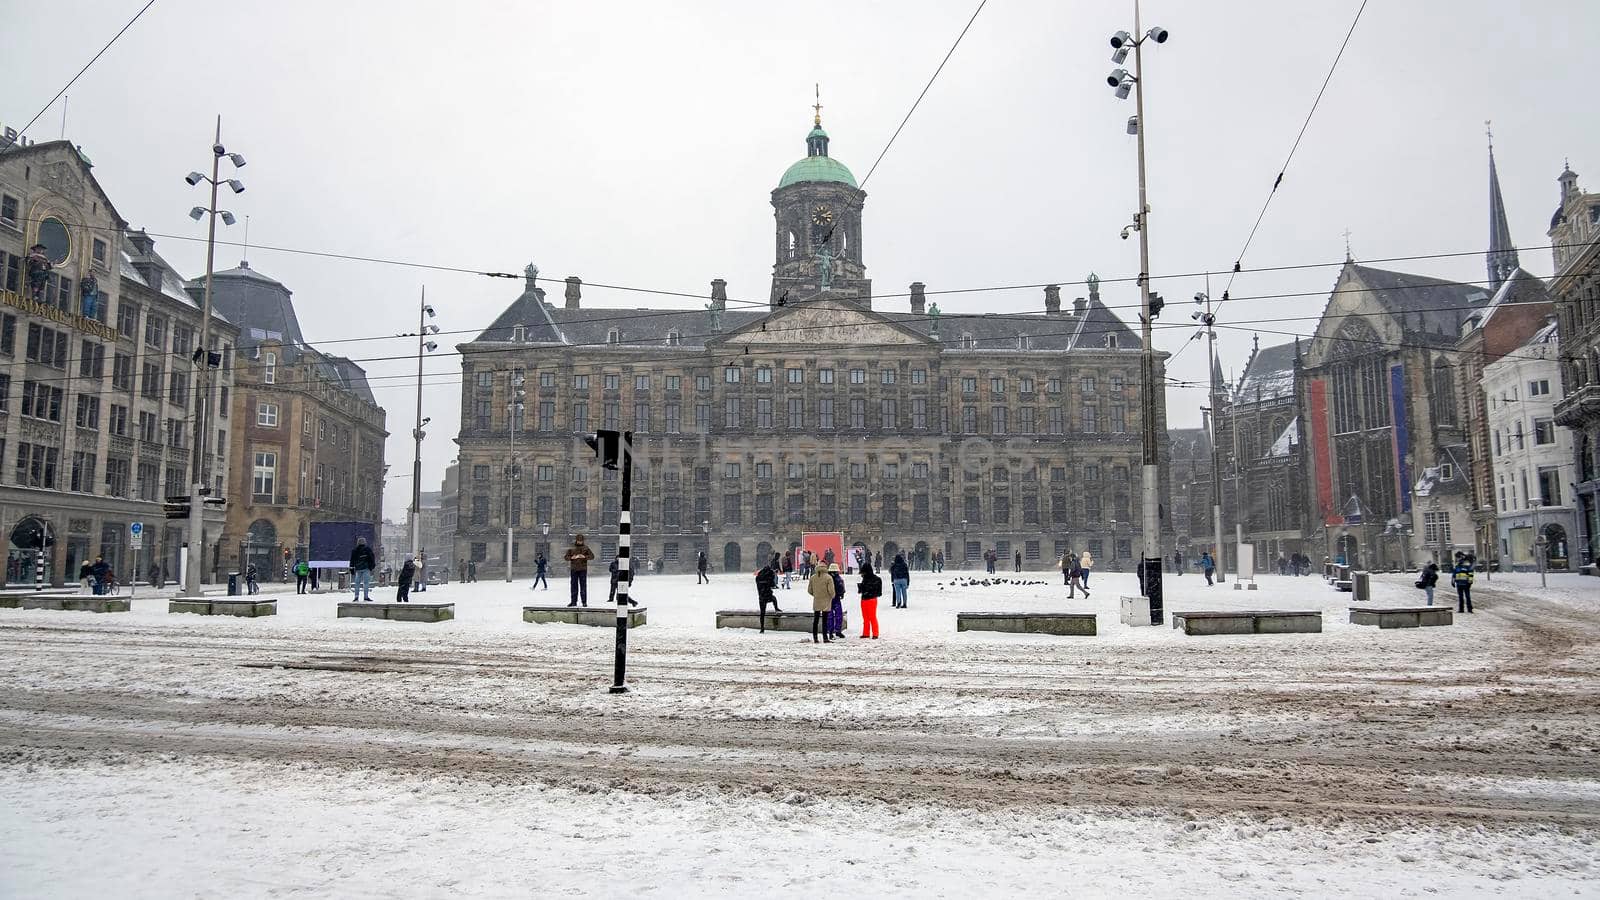 Snowy city Amsterdam at the Dam square in the Netherlands in winter by devy